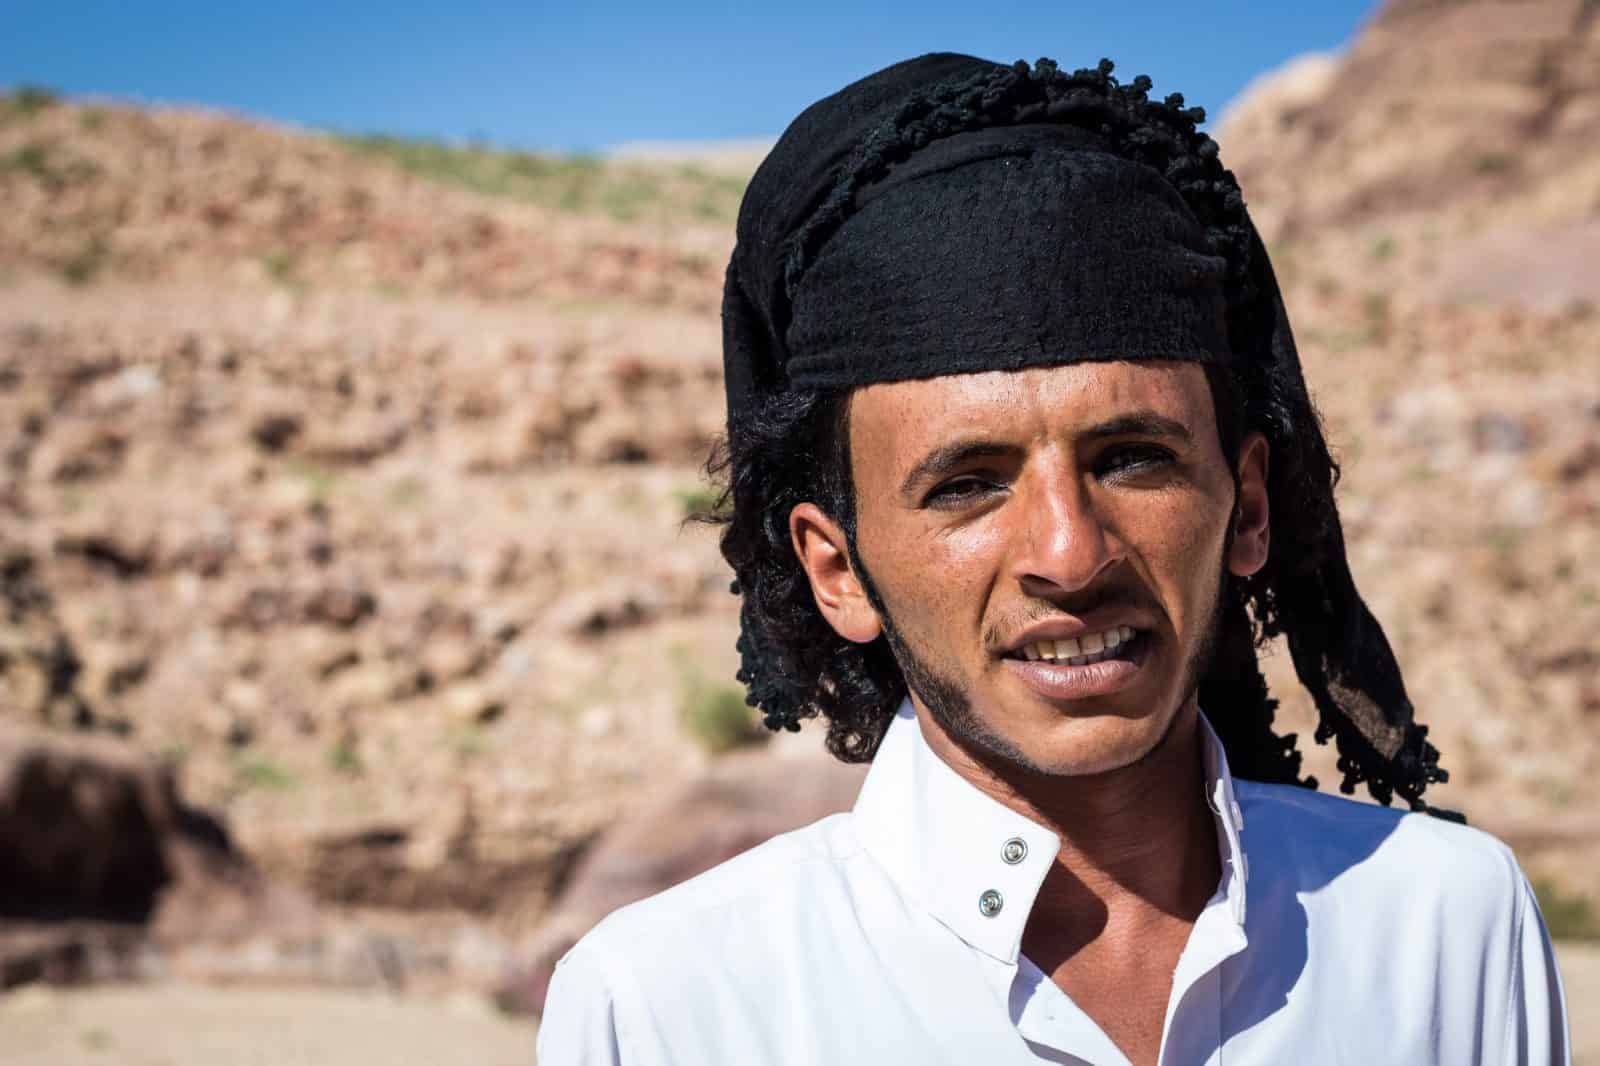 A local Bedouin from Petra